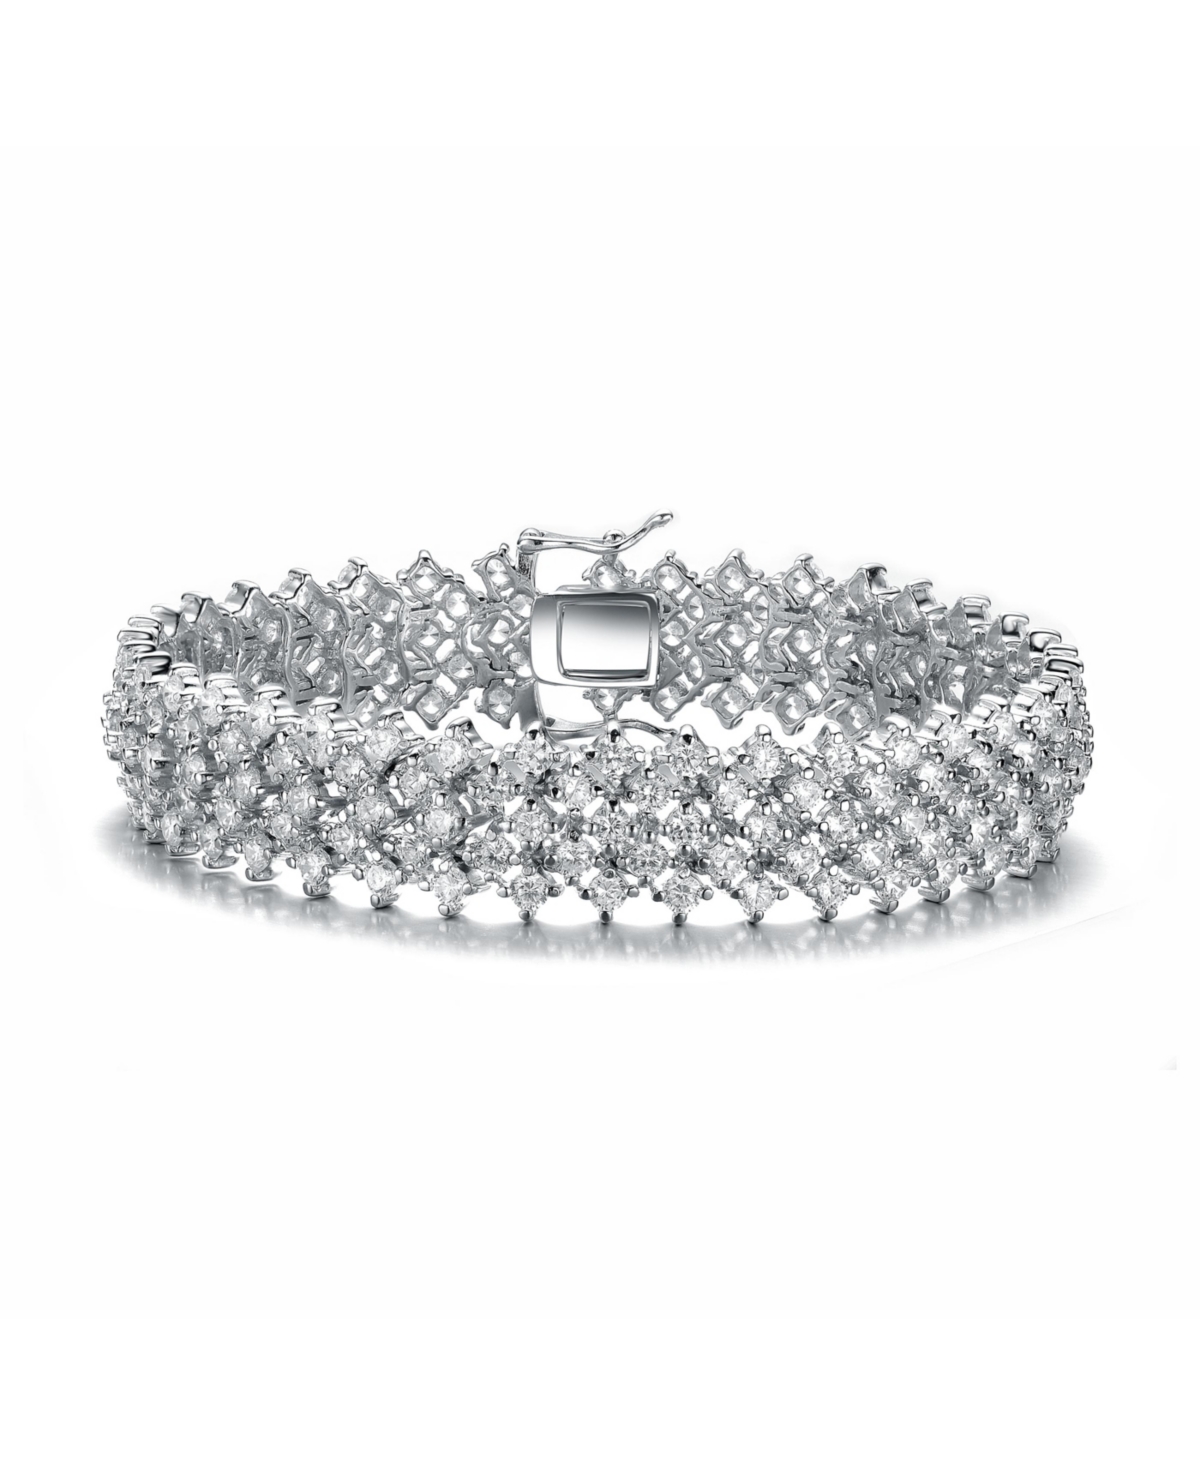 Genevive Sterling Silver Cubic Zirconia Bracelet With Rows Of Stones In Clear